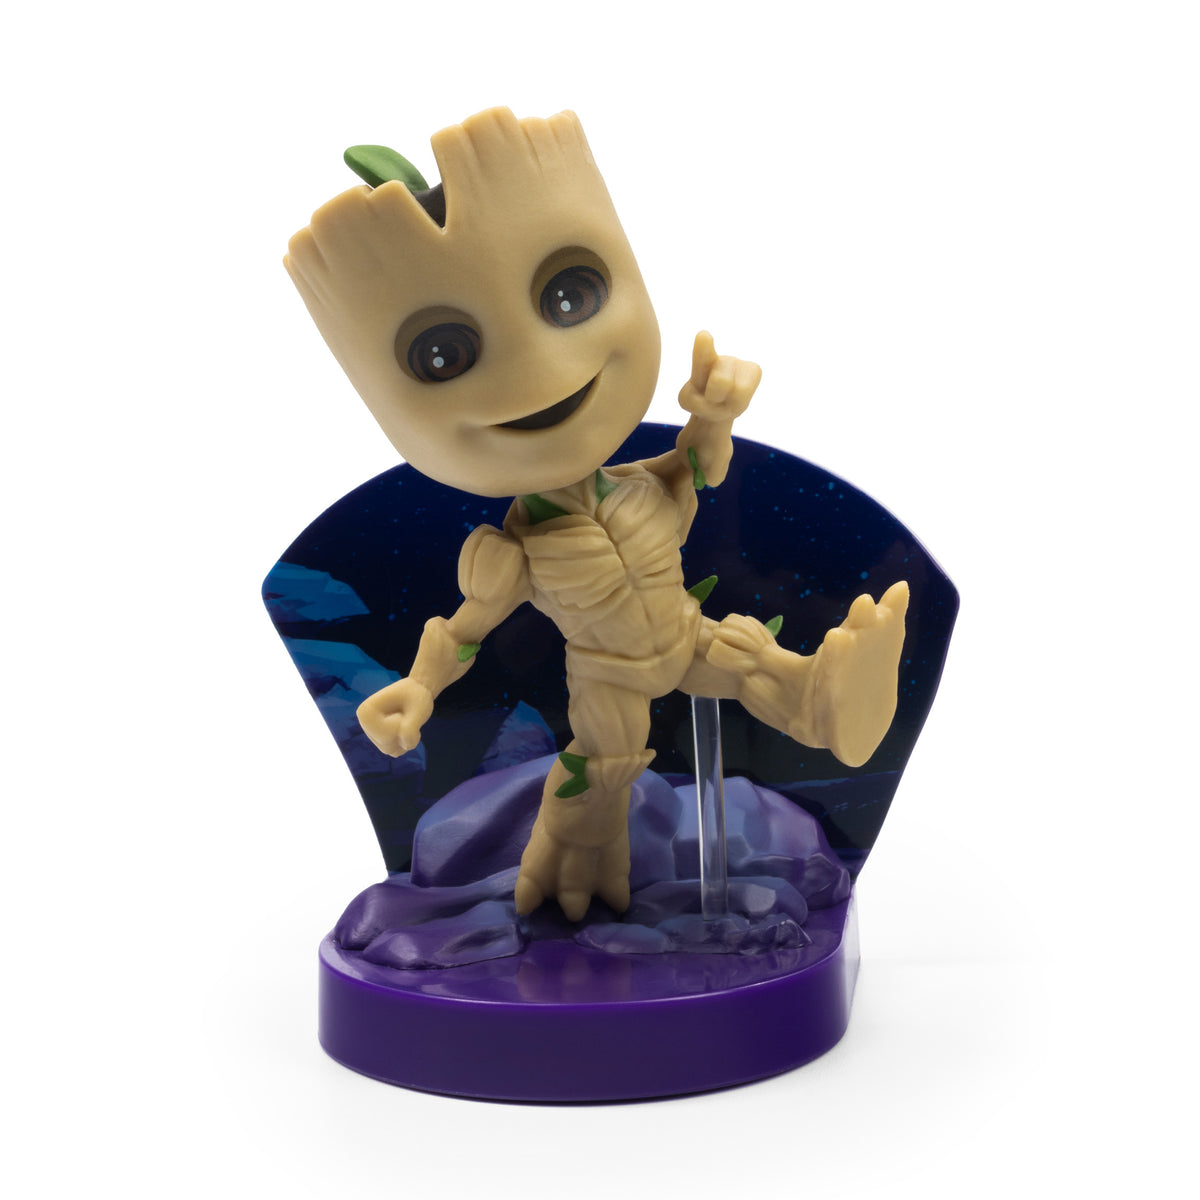 Marvel Superama Groot Glow-in-the-Dark – The Loyal Subjects